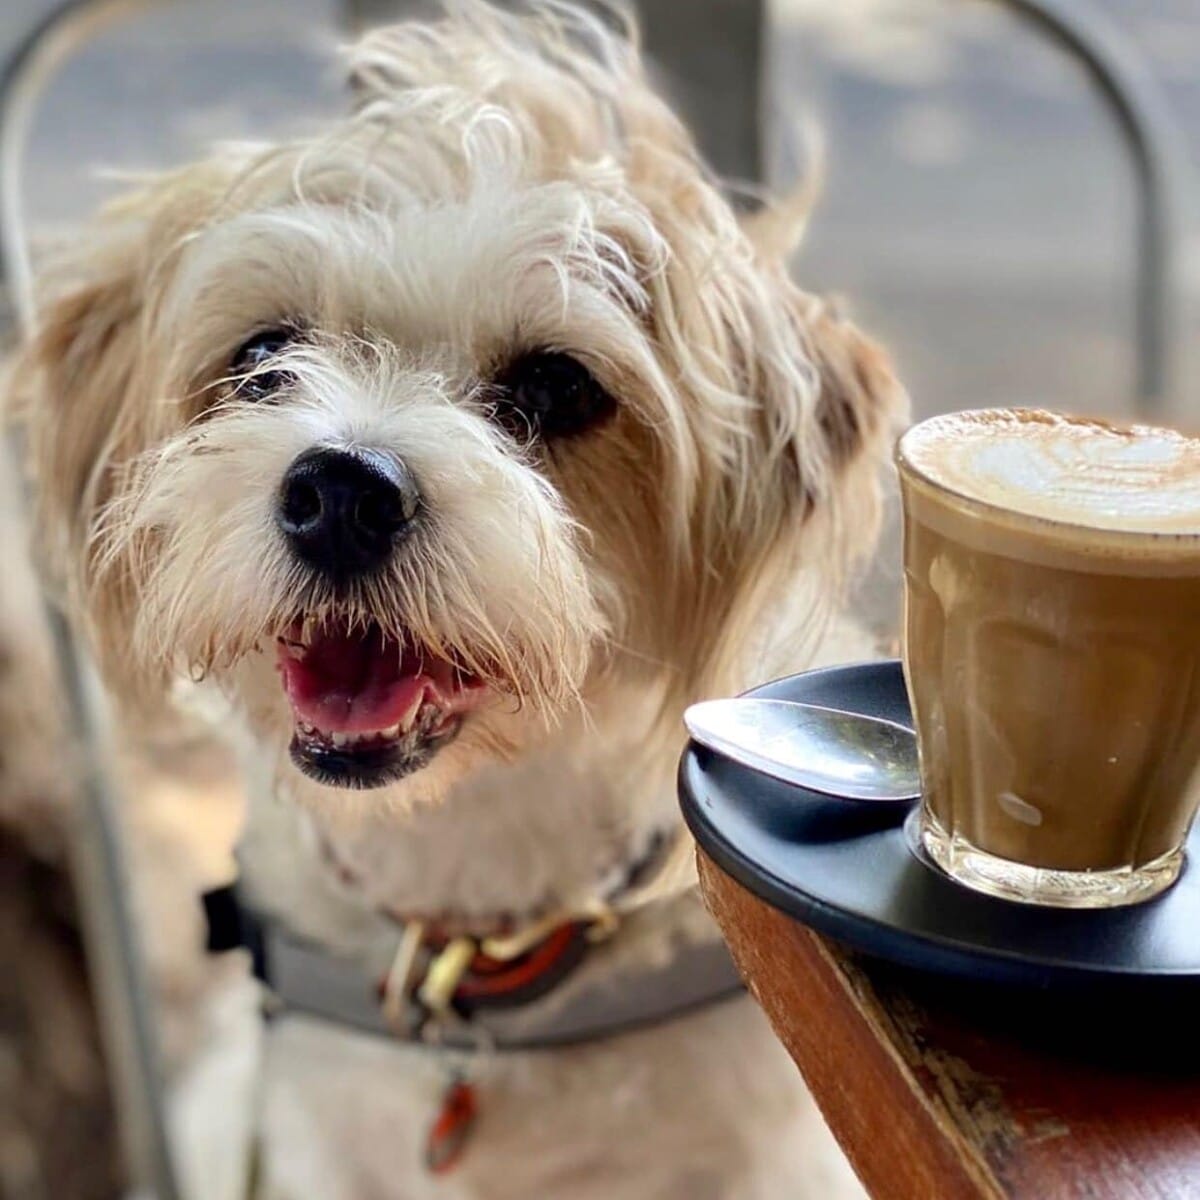 A white fluffy dog looks ready for its caffeine fix in this close-up photo taken in a dog-friendly brunch spot in Melbourne. The small dog is sitting at a table in one of the outdoor tables of the cafe.